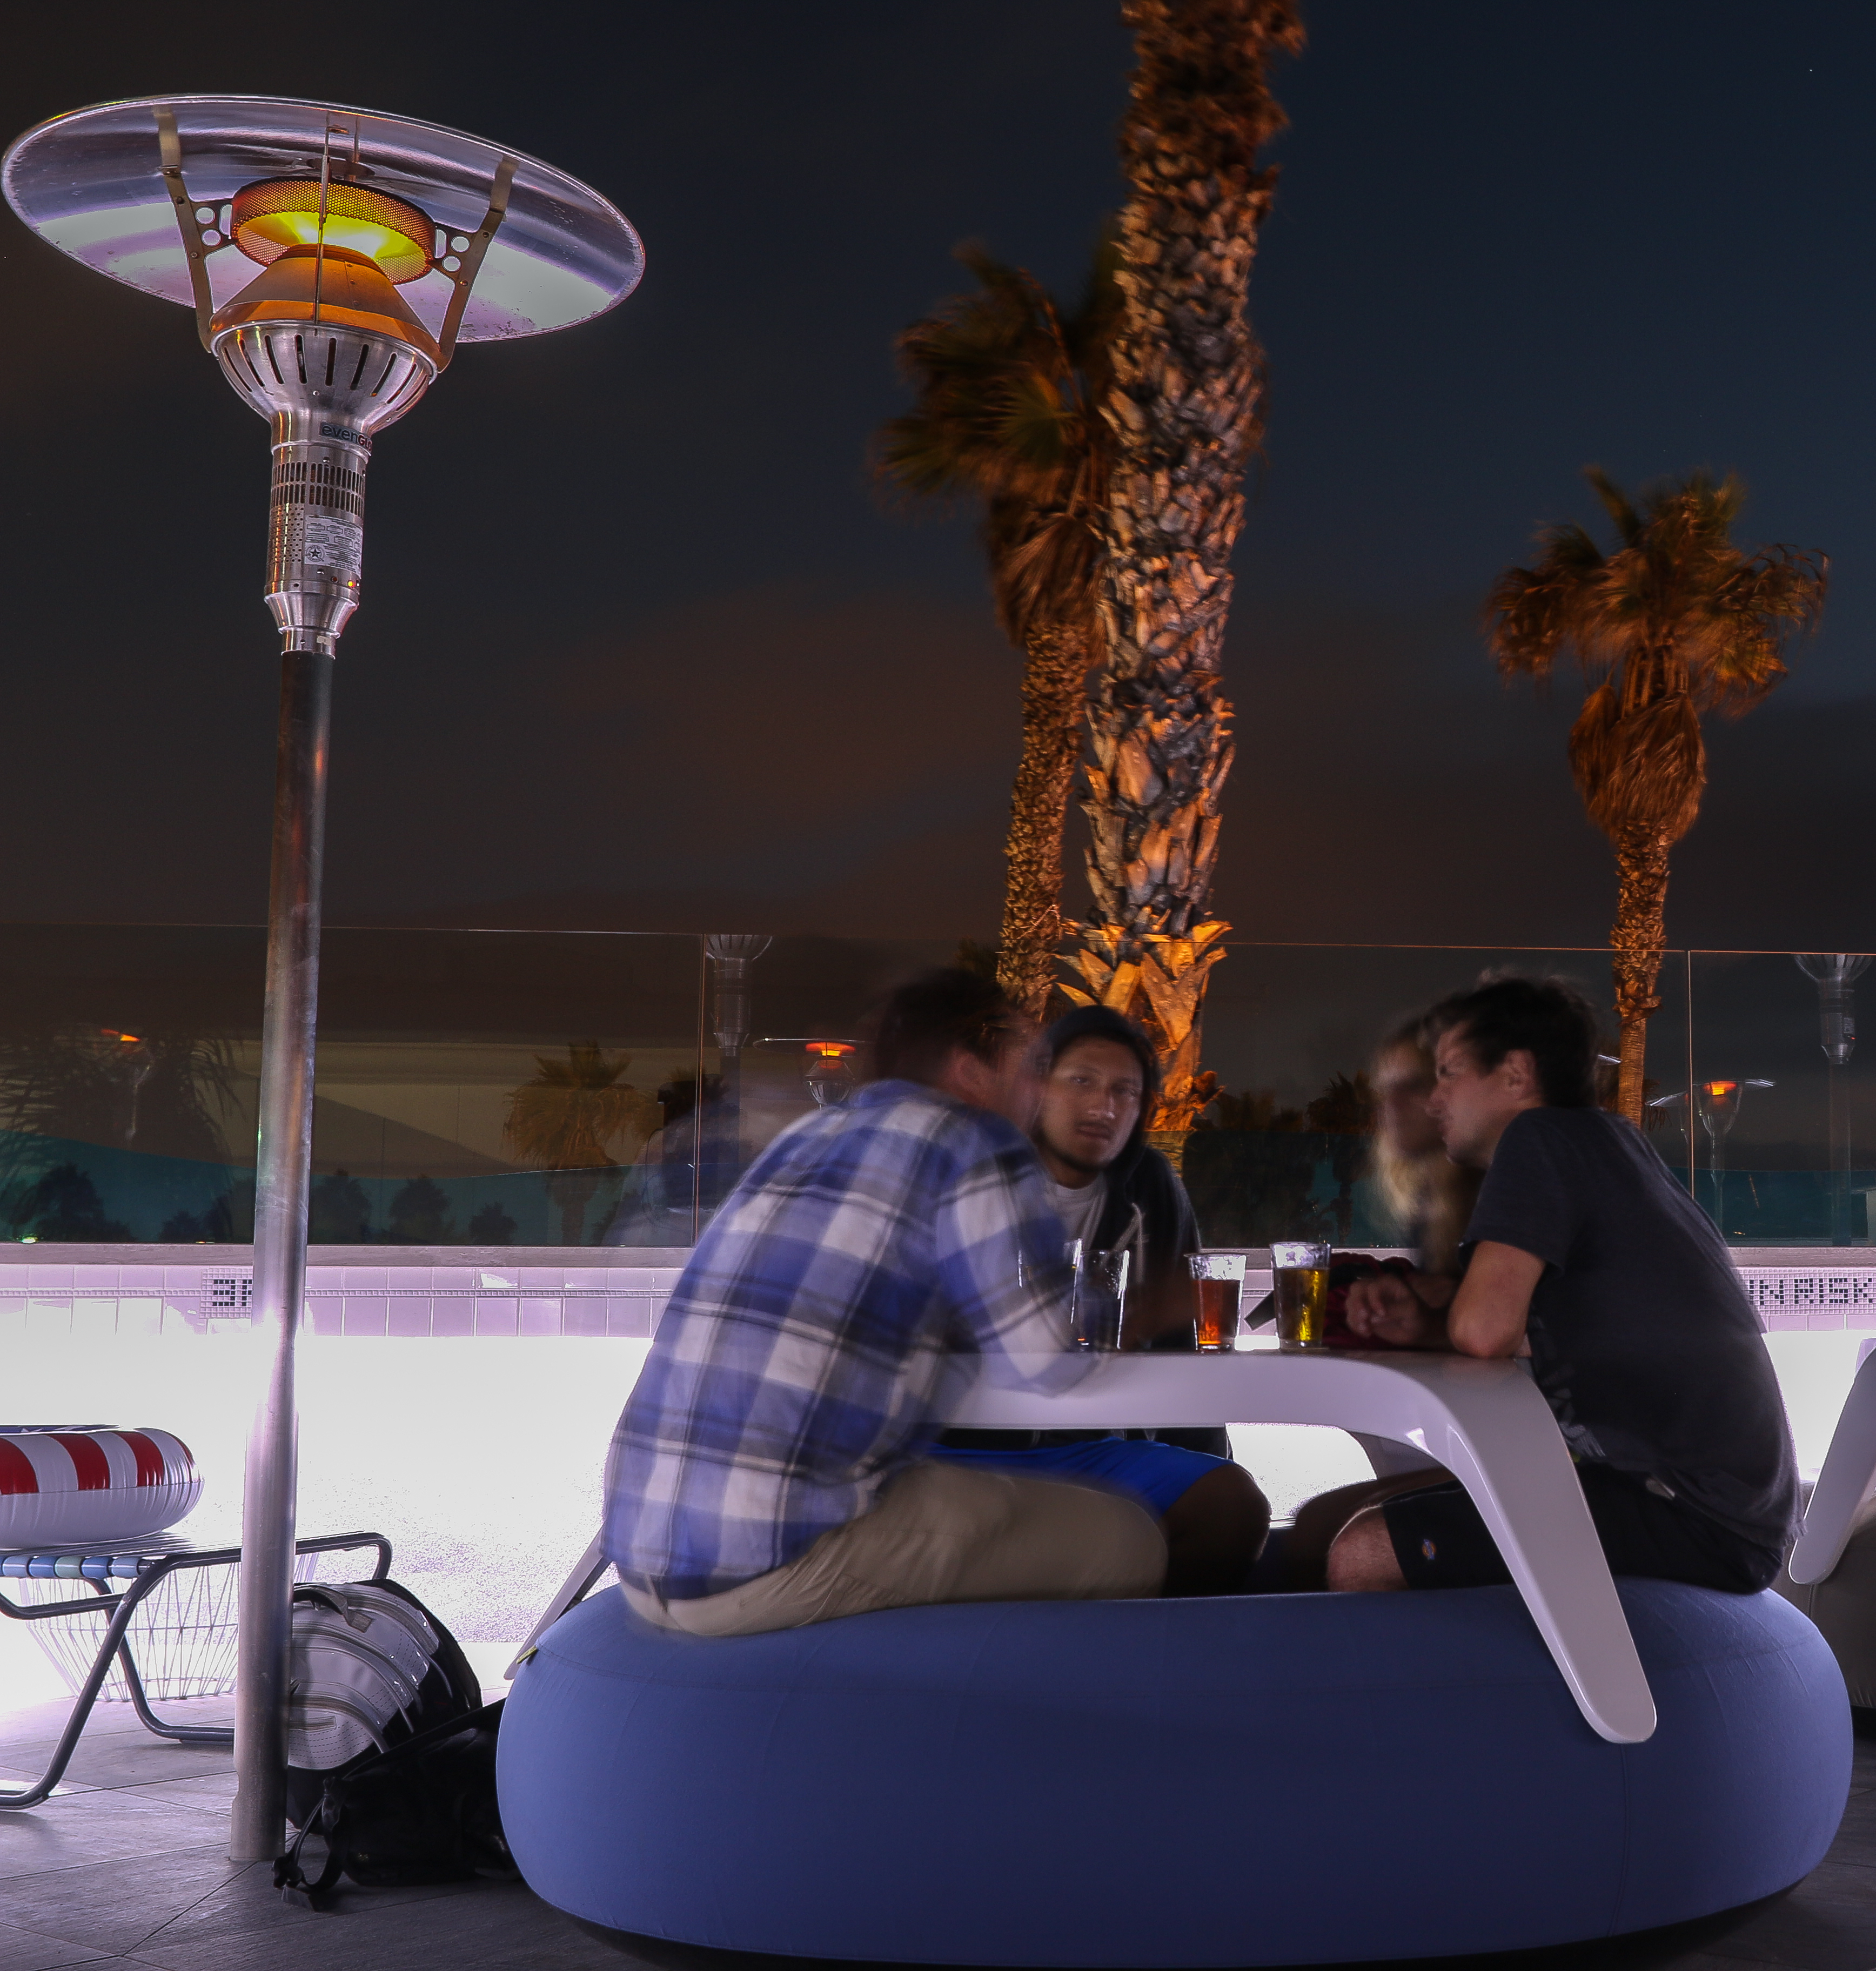 Evenglo Ga301u Gas Patio Heater At Belmont Park San Diego 2 with regard to proportions 3472 X 3648